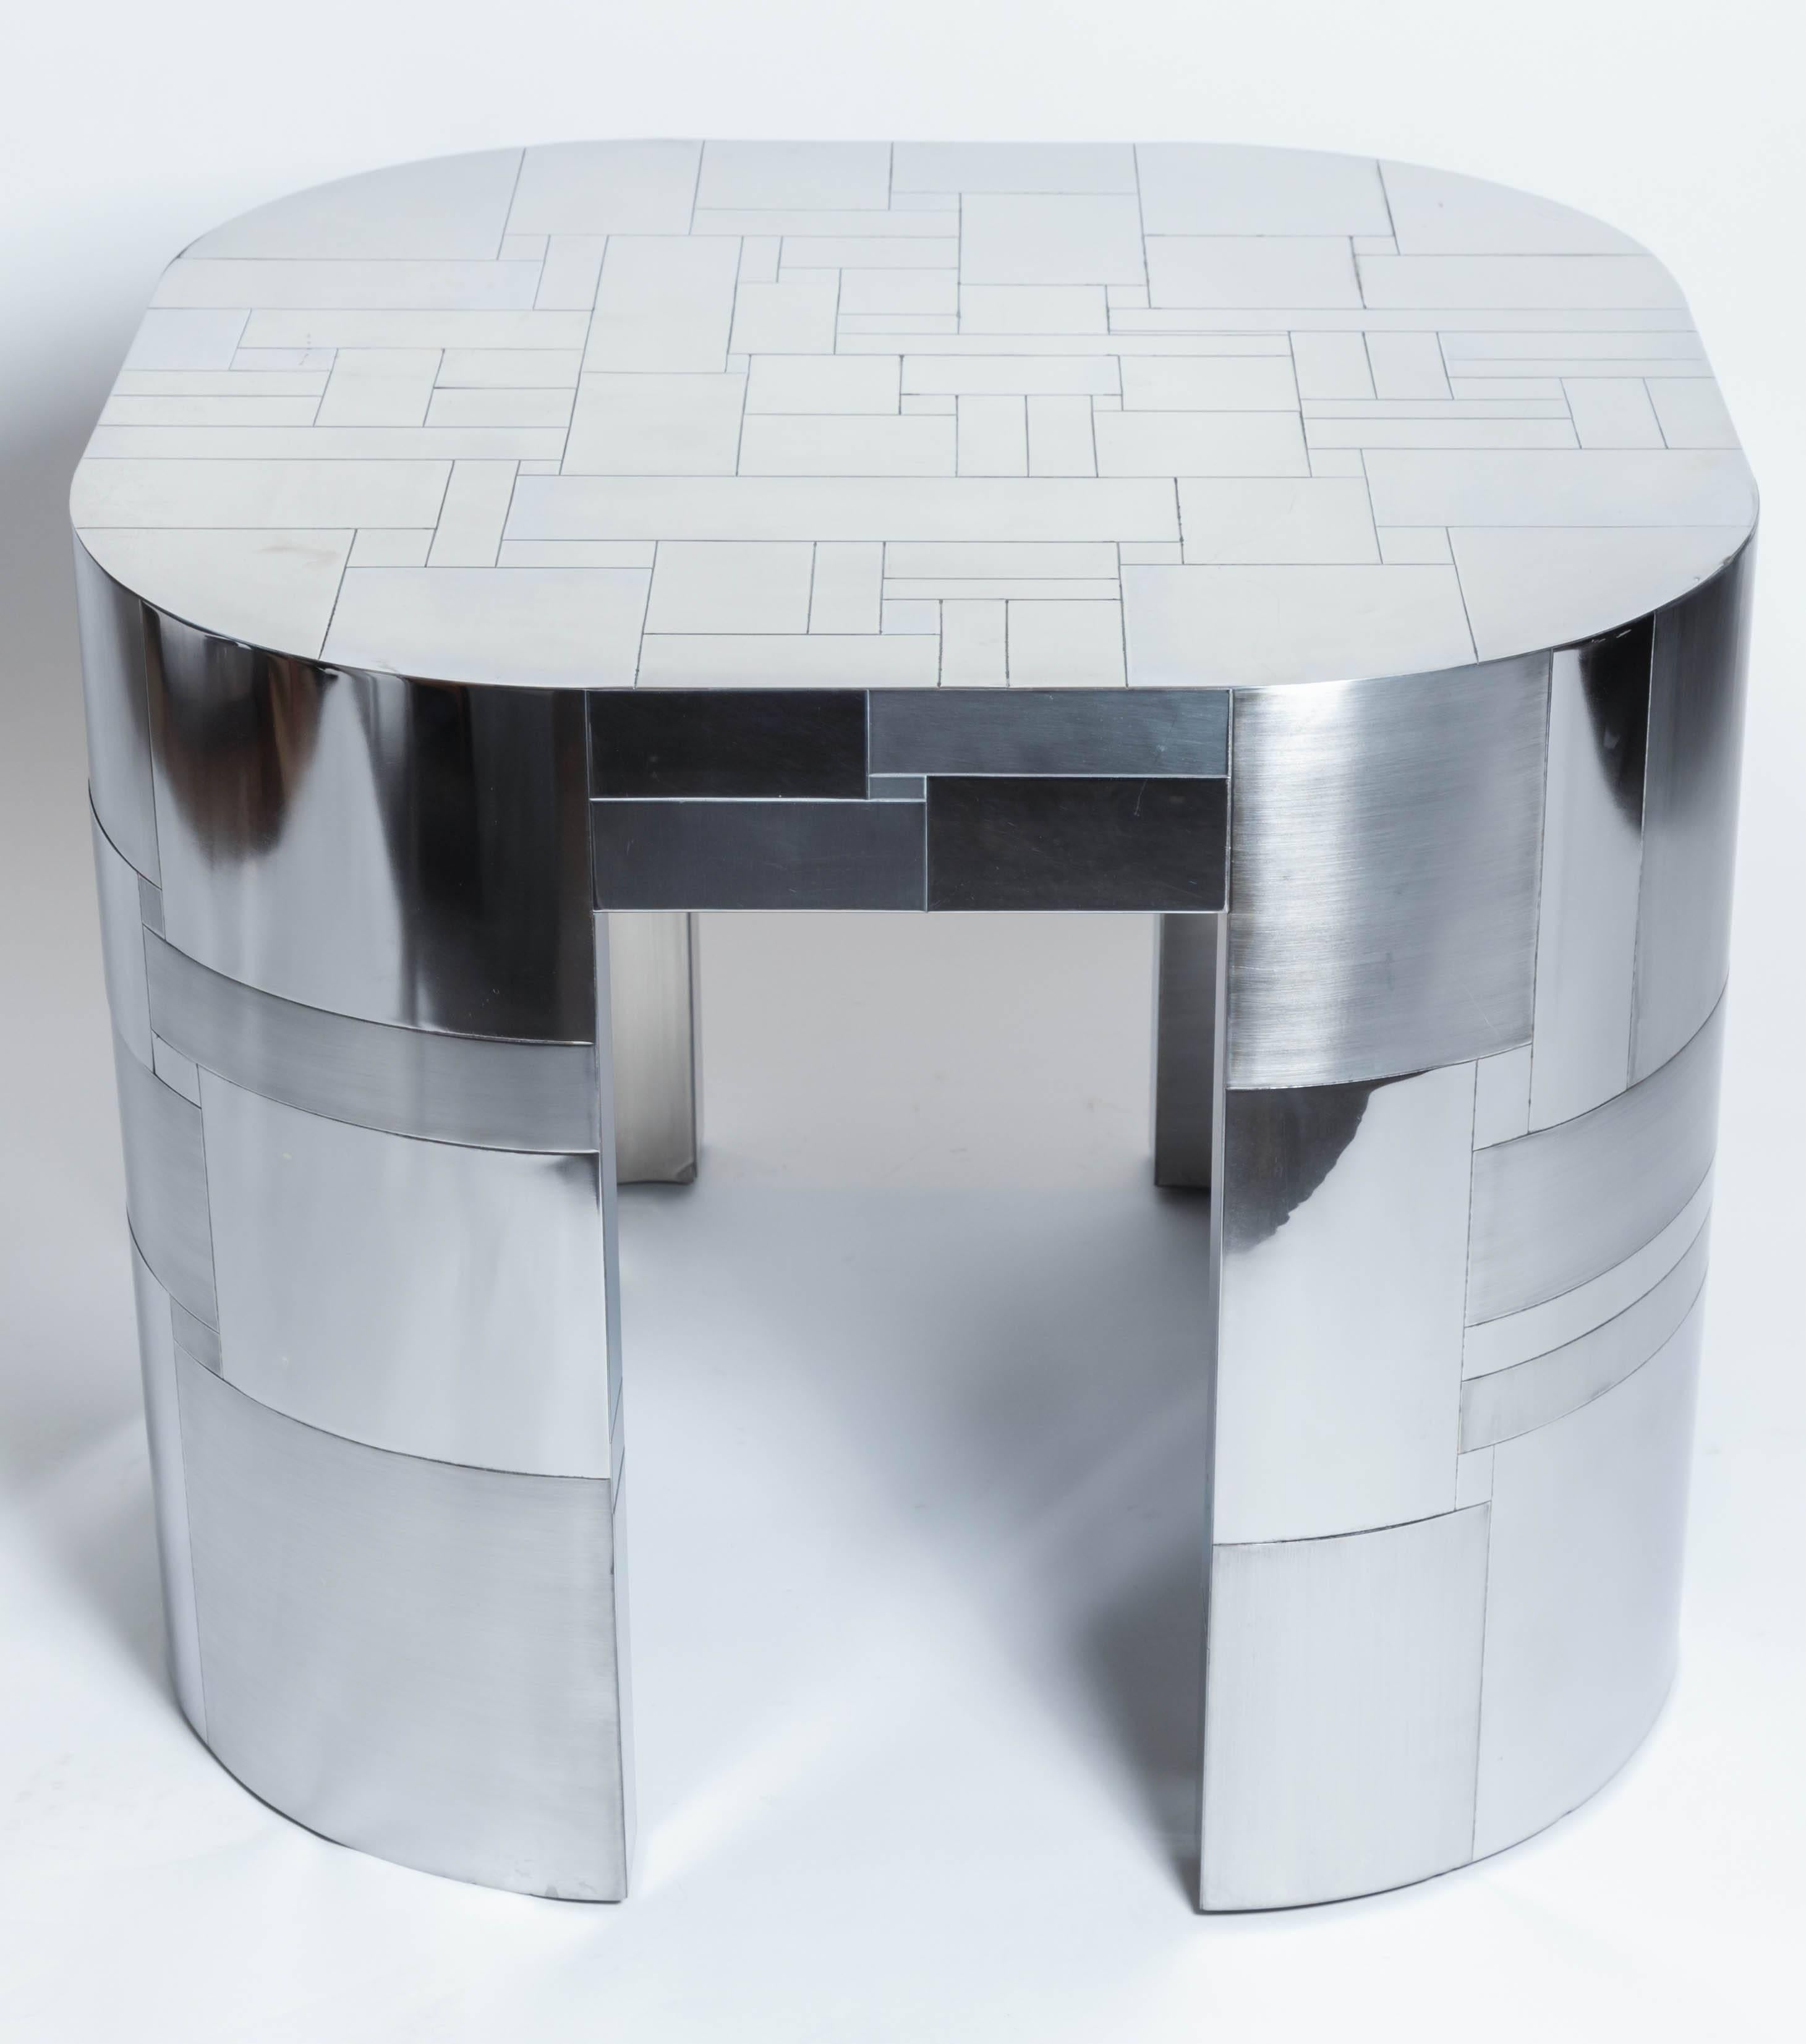 Chrome-plated occasional table by Paul Evans, Cityscape PE500 Series, 1975. Signature to plate on underside.